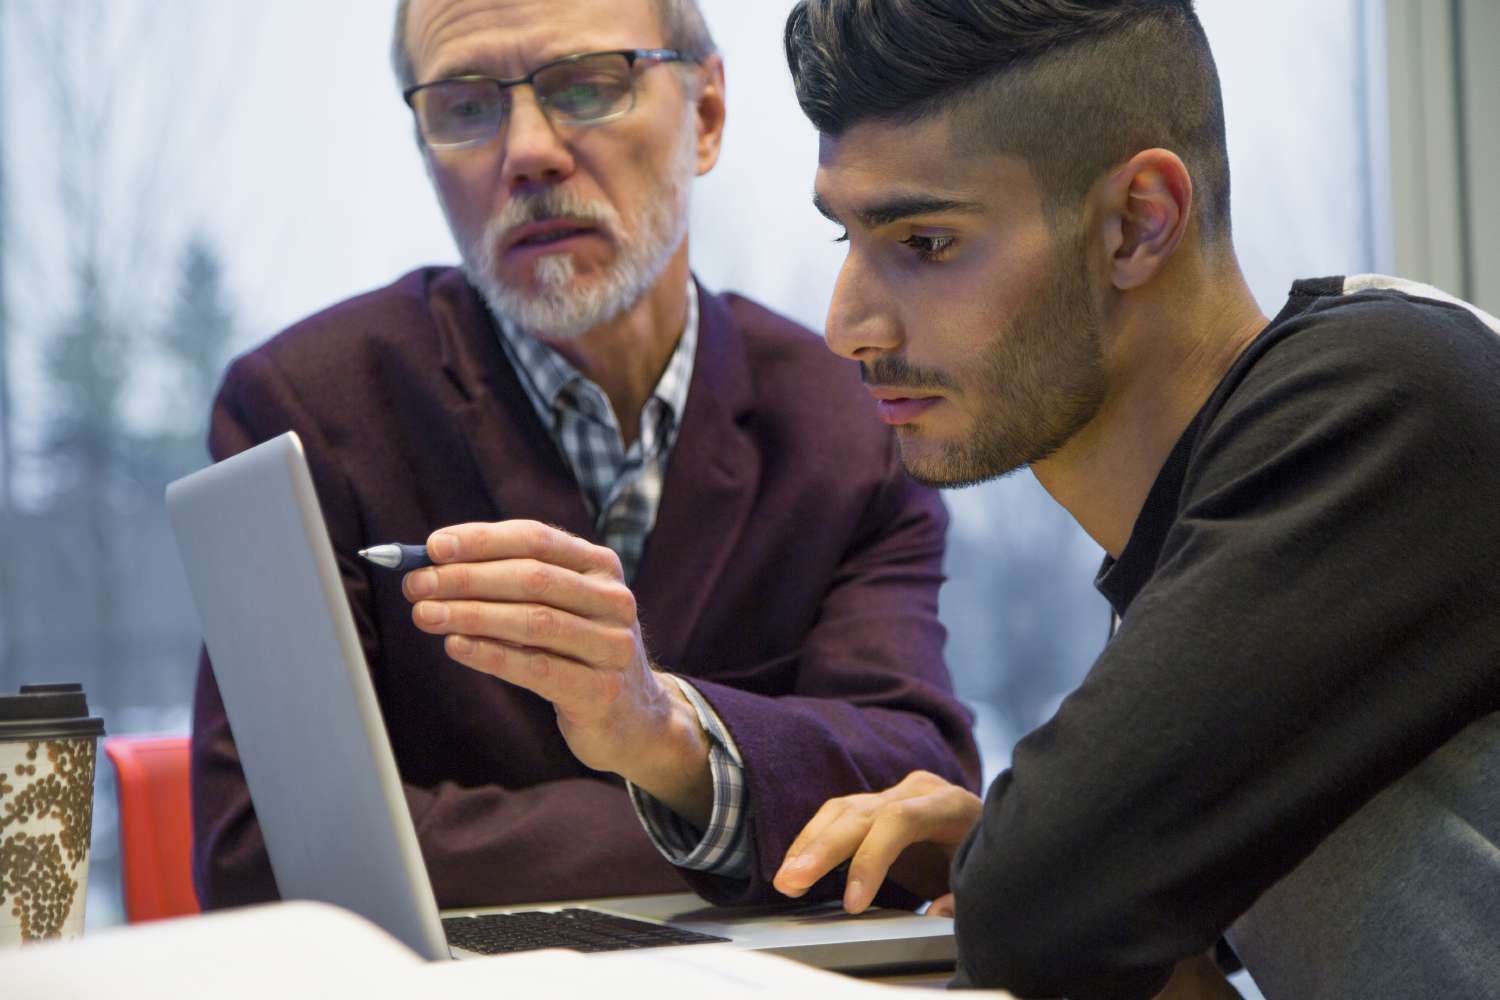 Instructor teaches student about data-driven design